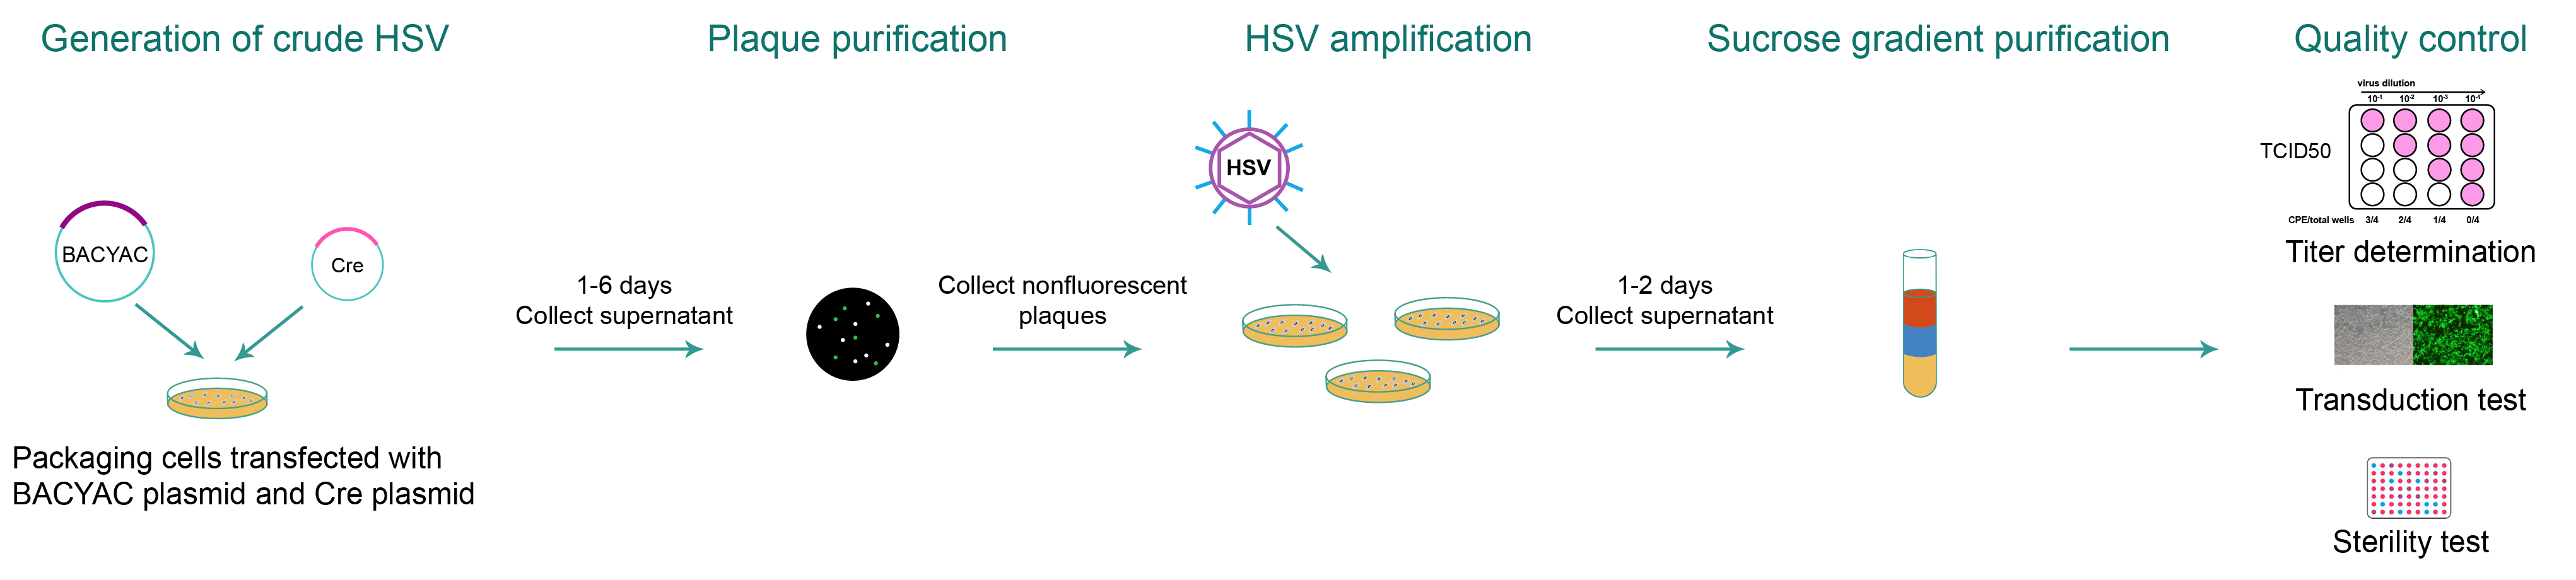 Typical workflow of HSV packaging from the generation of crude HSV to quality control.